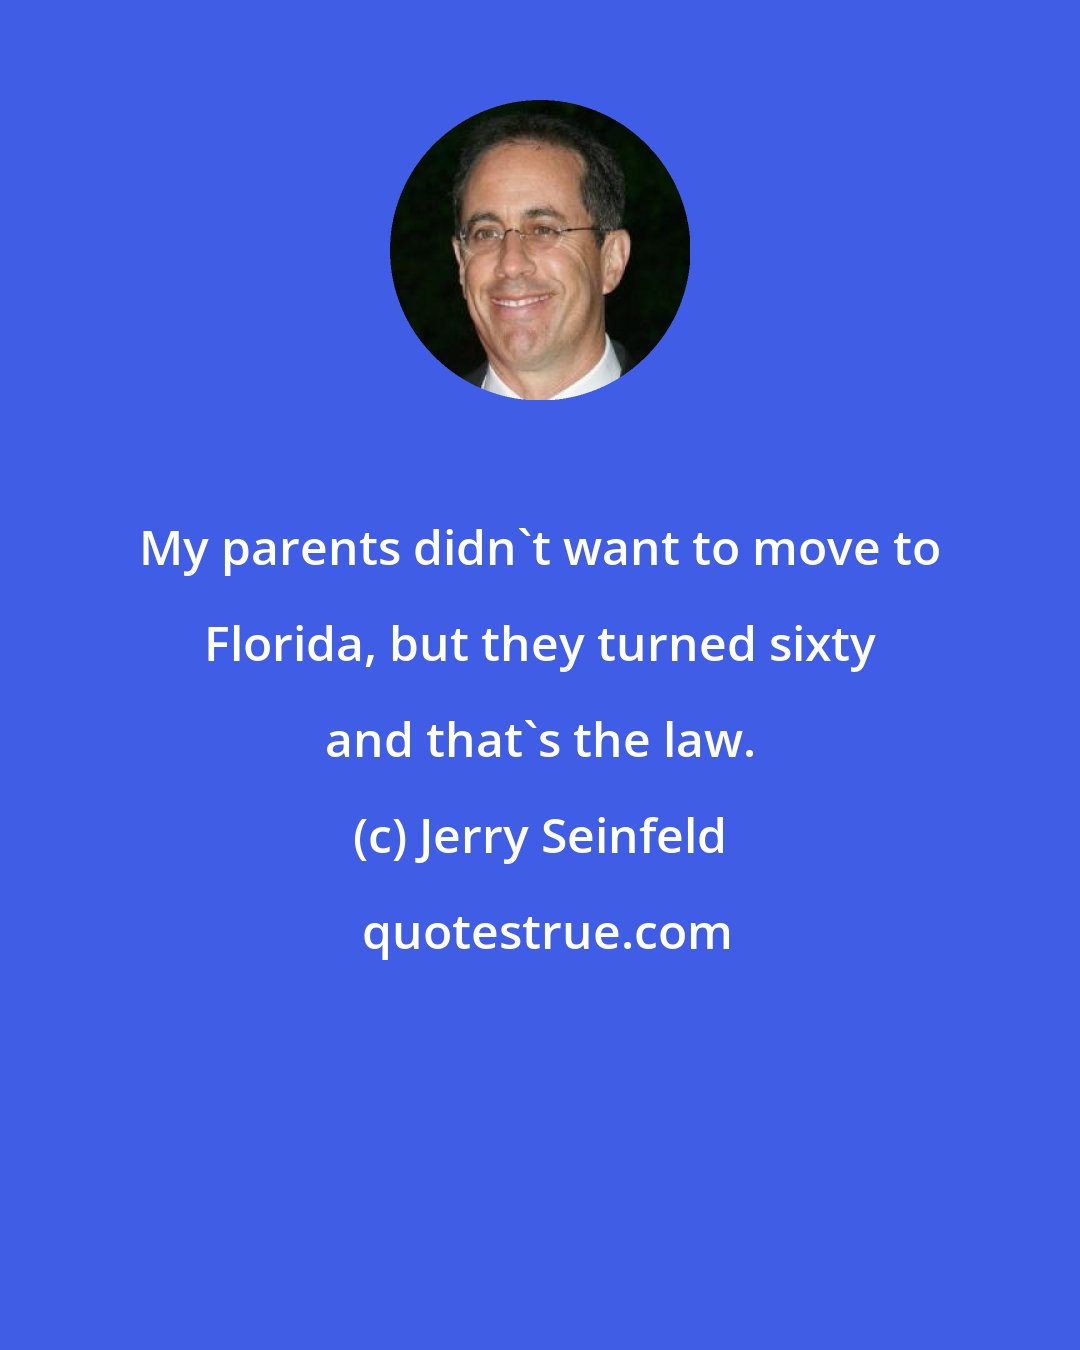 Jerry Seinfeld: My parents didn't want to move to Florida, but they turned sixty and that's the law.